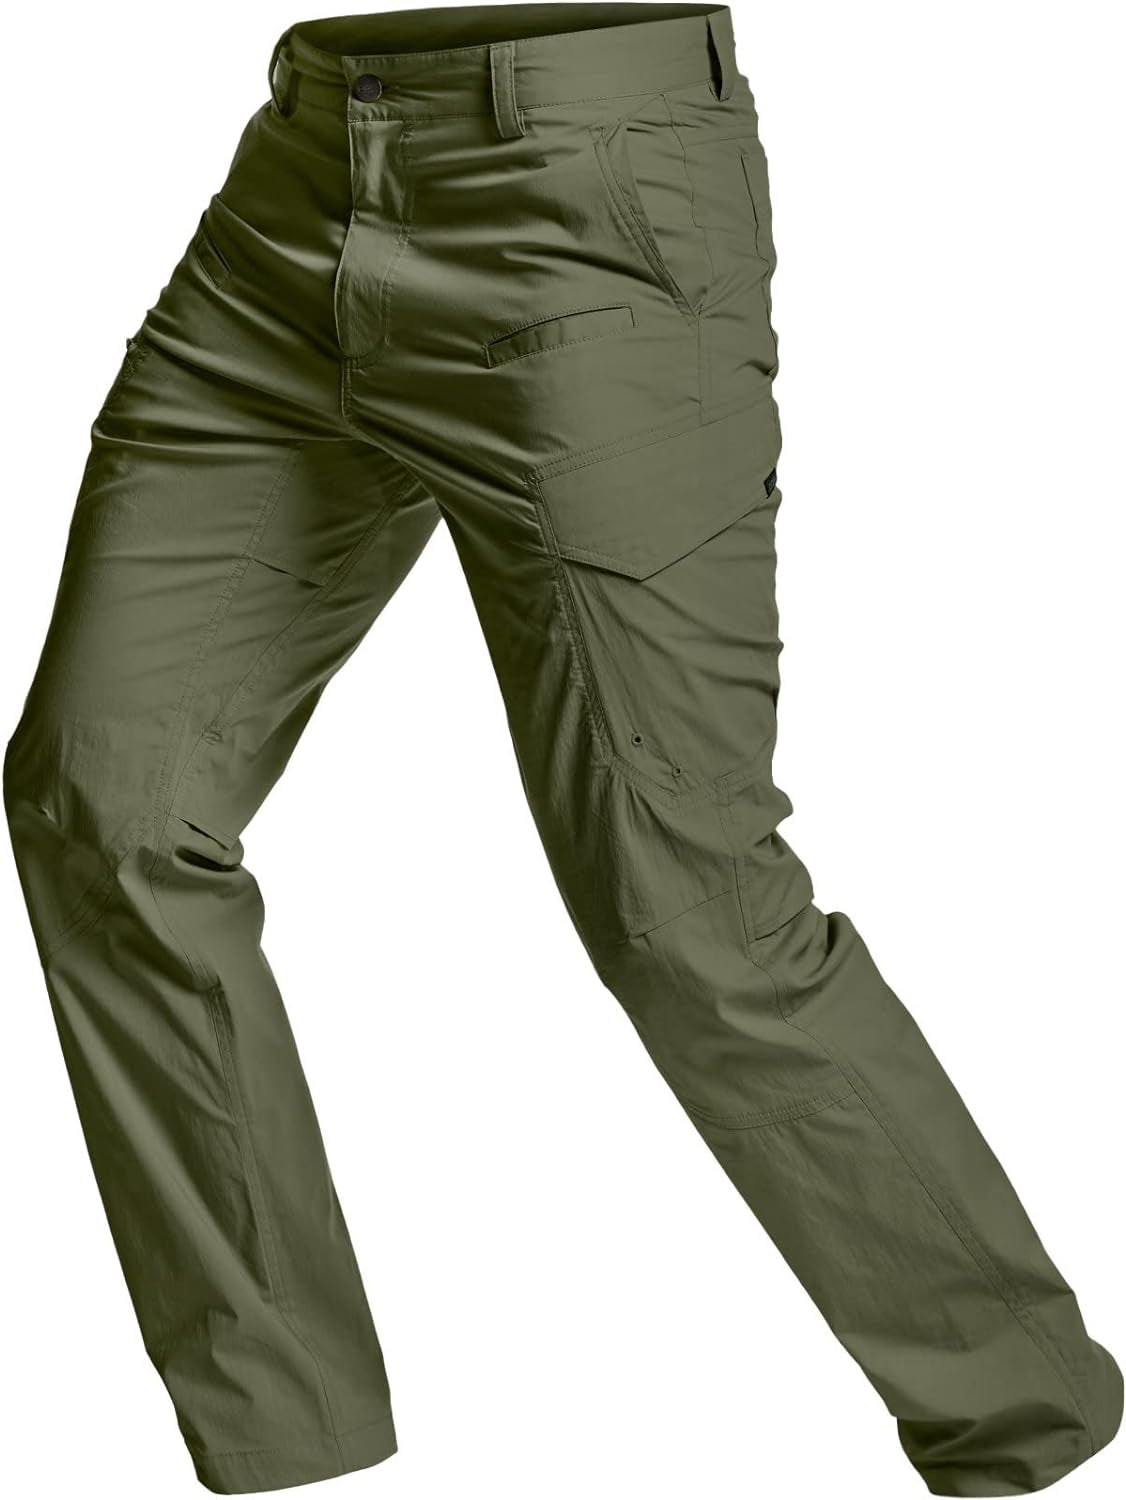 Men's Quick Dry Tactical Pants, Water Resistant Outdoor Pants, Lightweight Stretch Cargo/Straight Work Hiking Pants